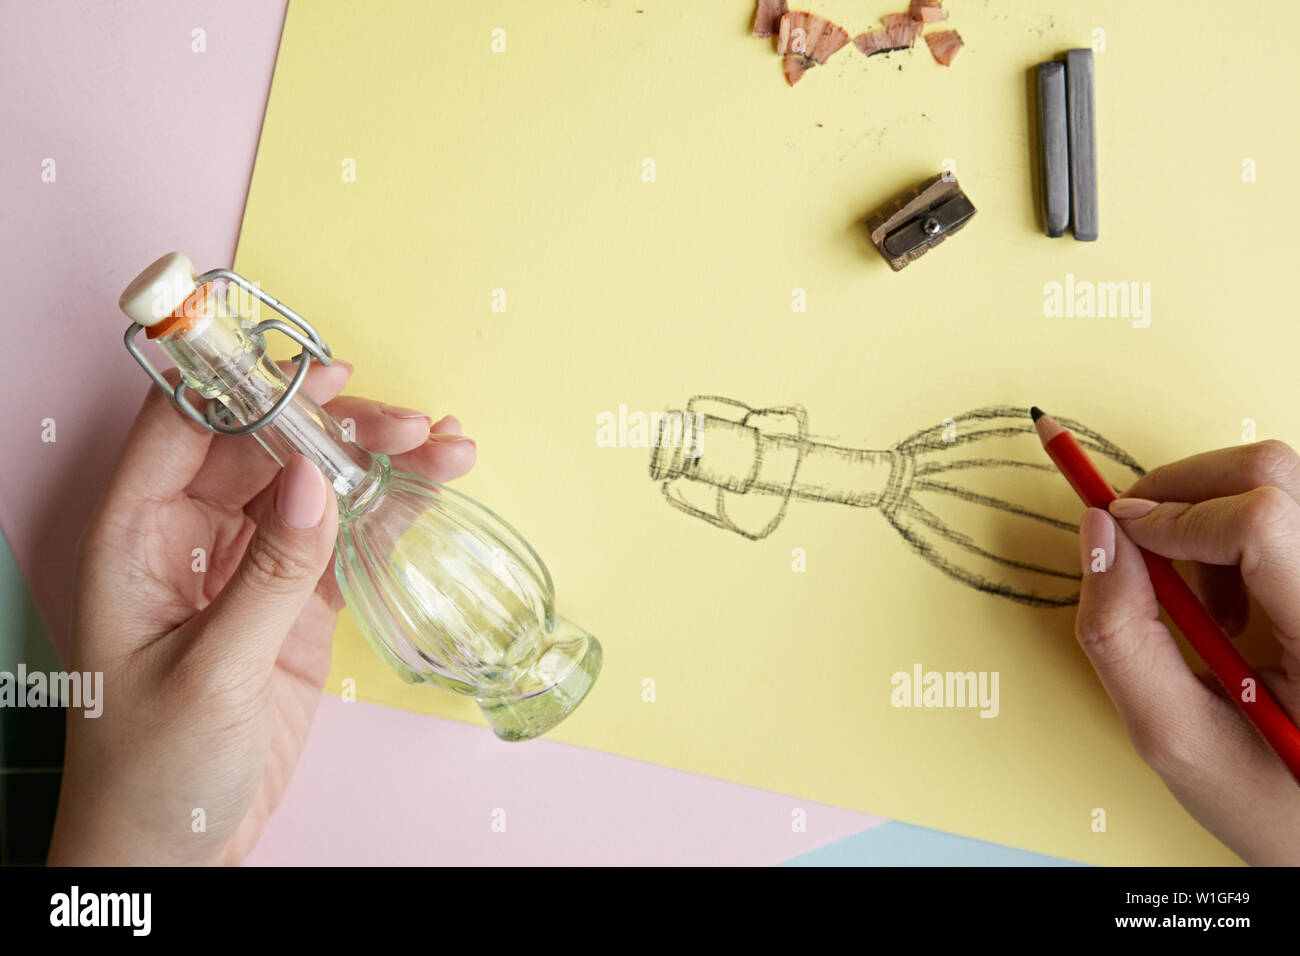 Hands drawing glass bottle Stock Photo